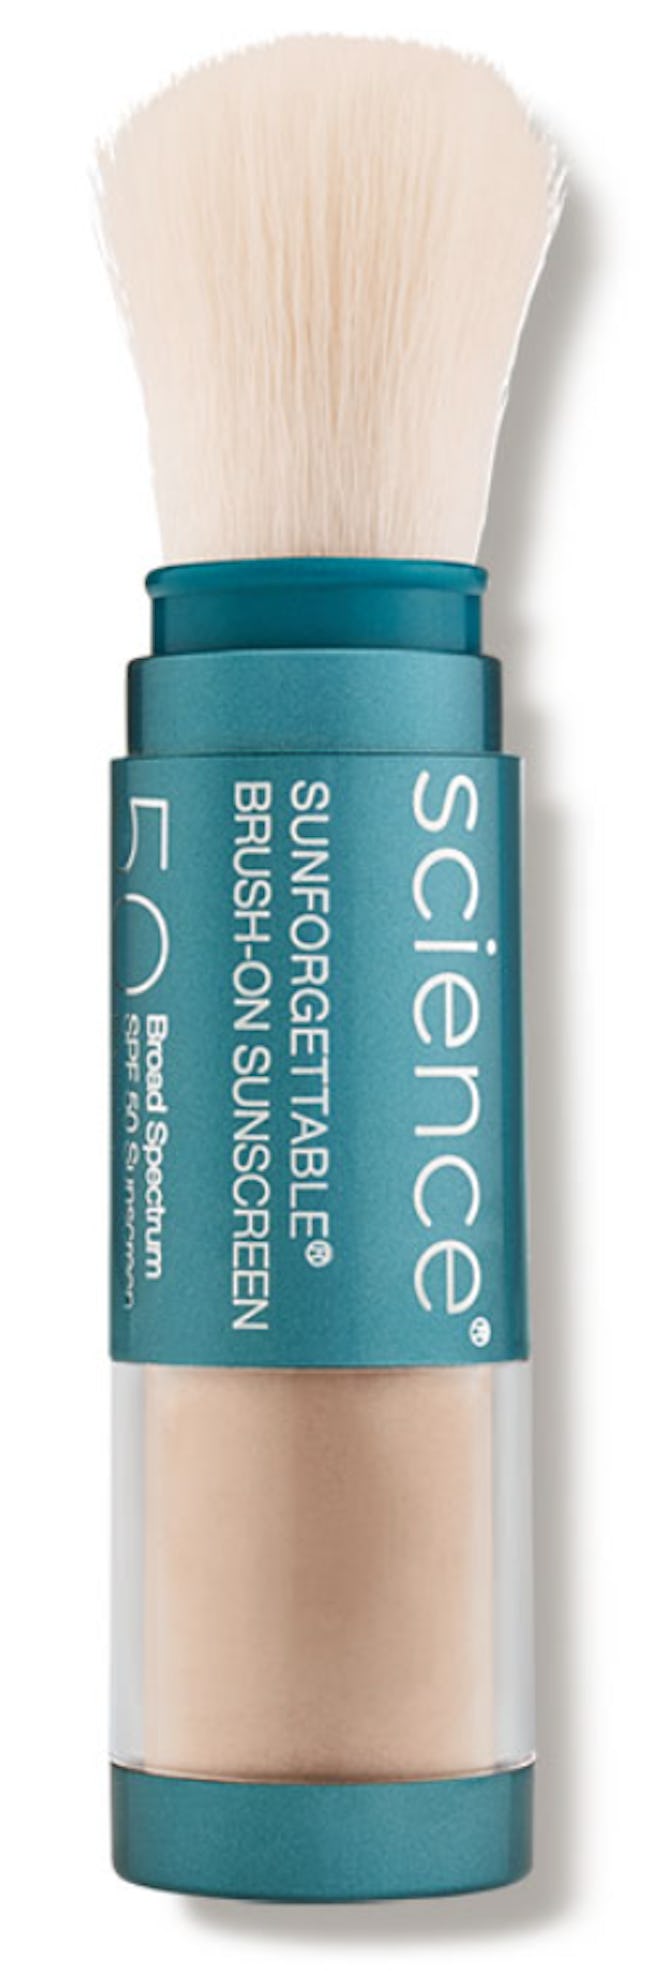 Colorscience Sunforgettable Total Protection Brush